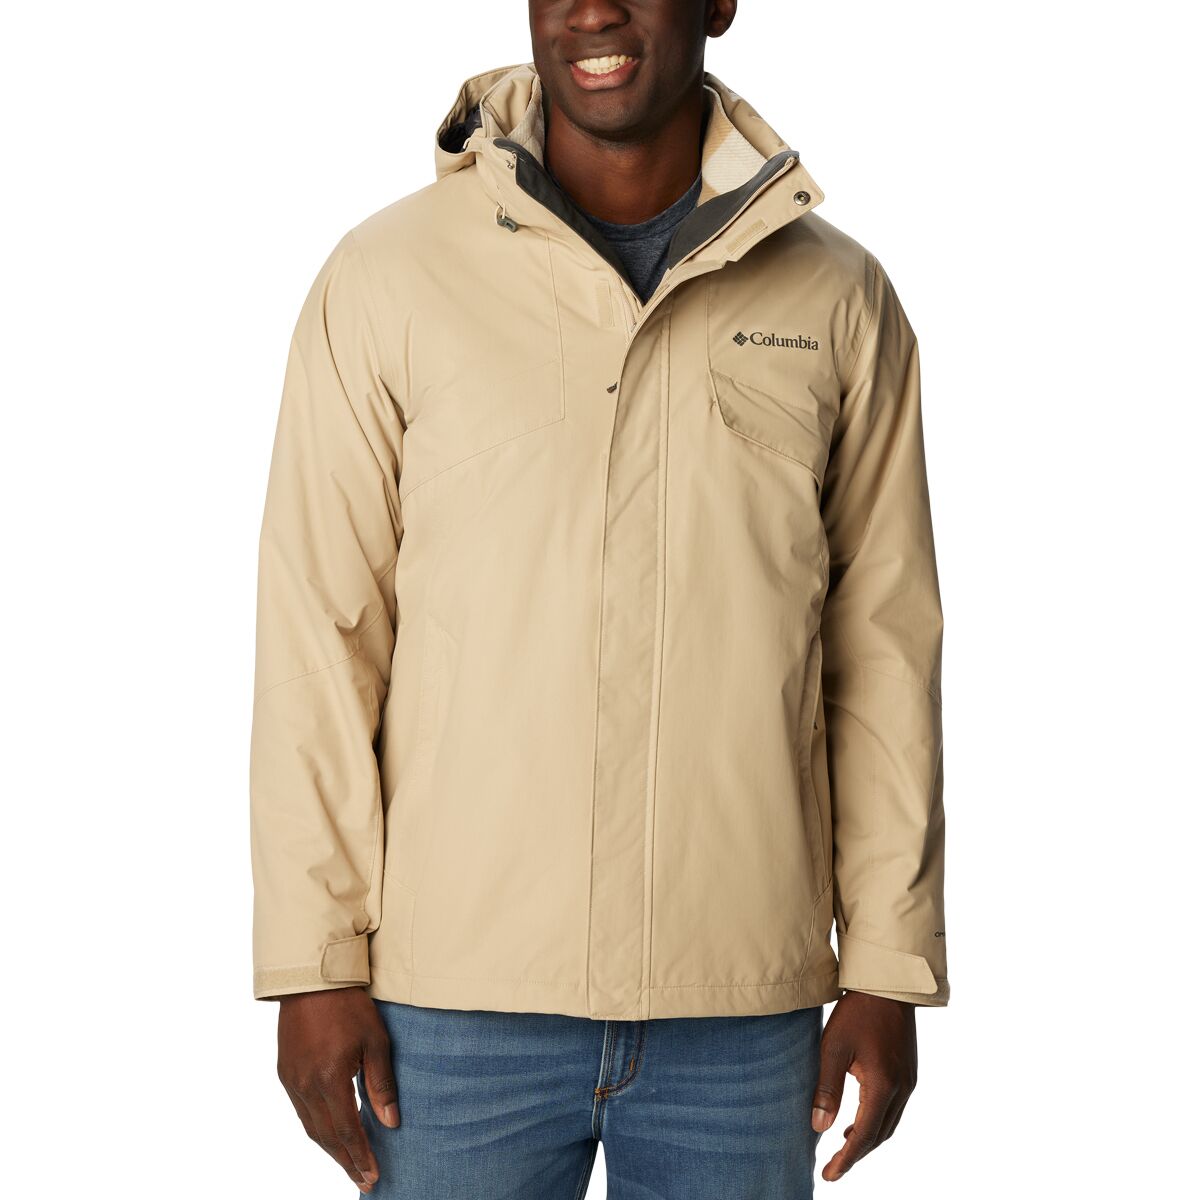 Columbia - Men's Jackets, Coats, Parkas. Sustainable fashion and apparel.